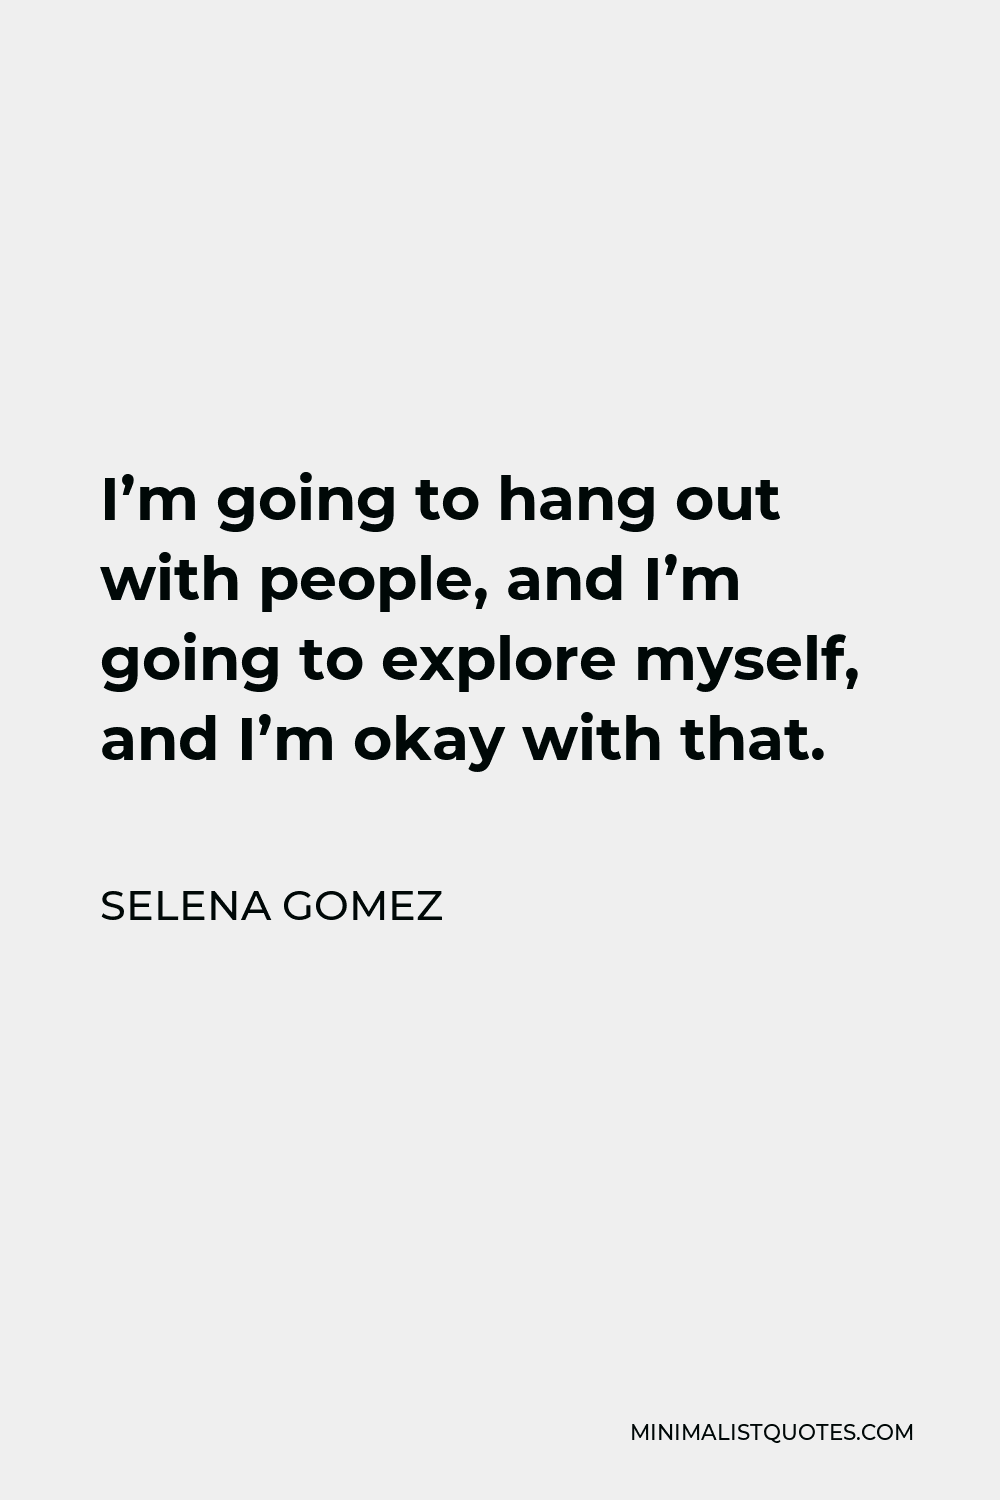 Selena Gomez Quote - I’m going to hang out with people, and I’m going to explore myself, and I’m okay with that.